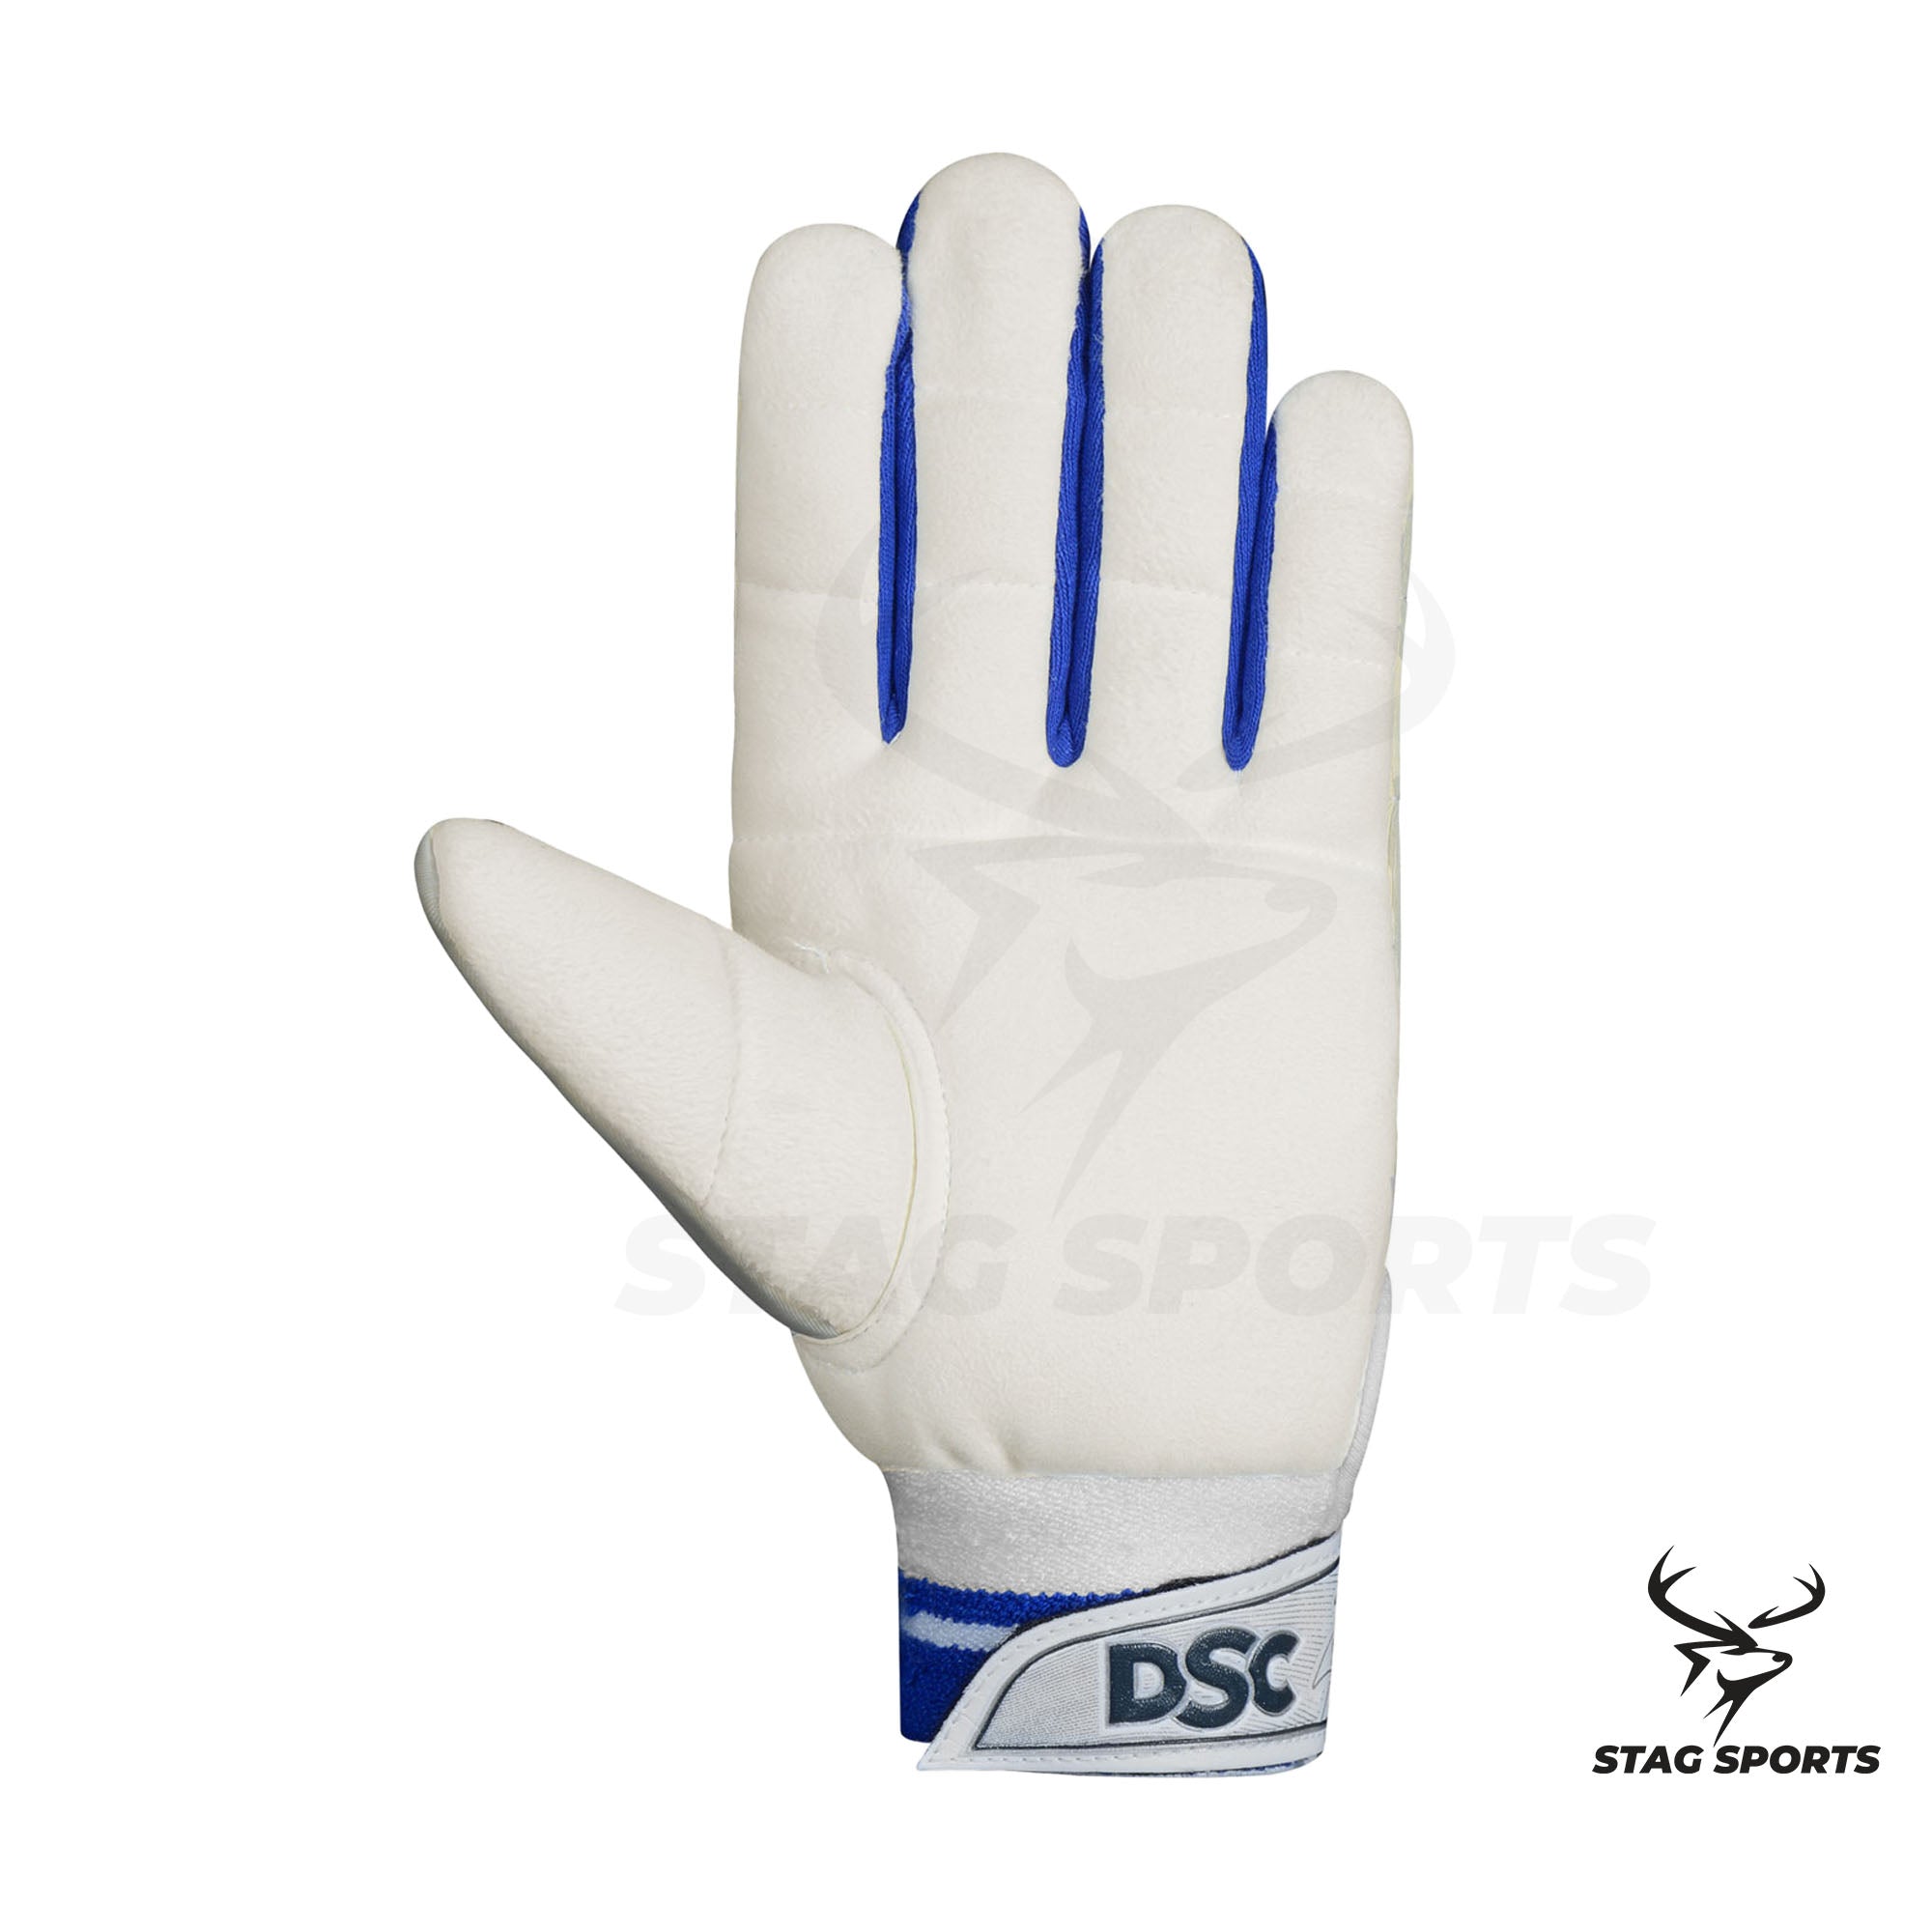 DSC PLAYER EDITION WICKET KEEPING INNERS